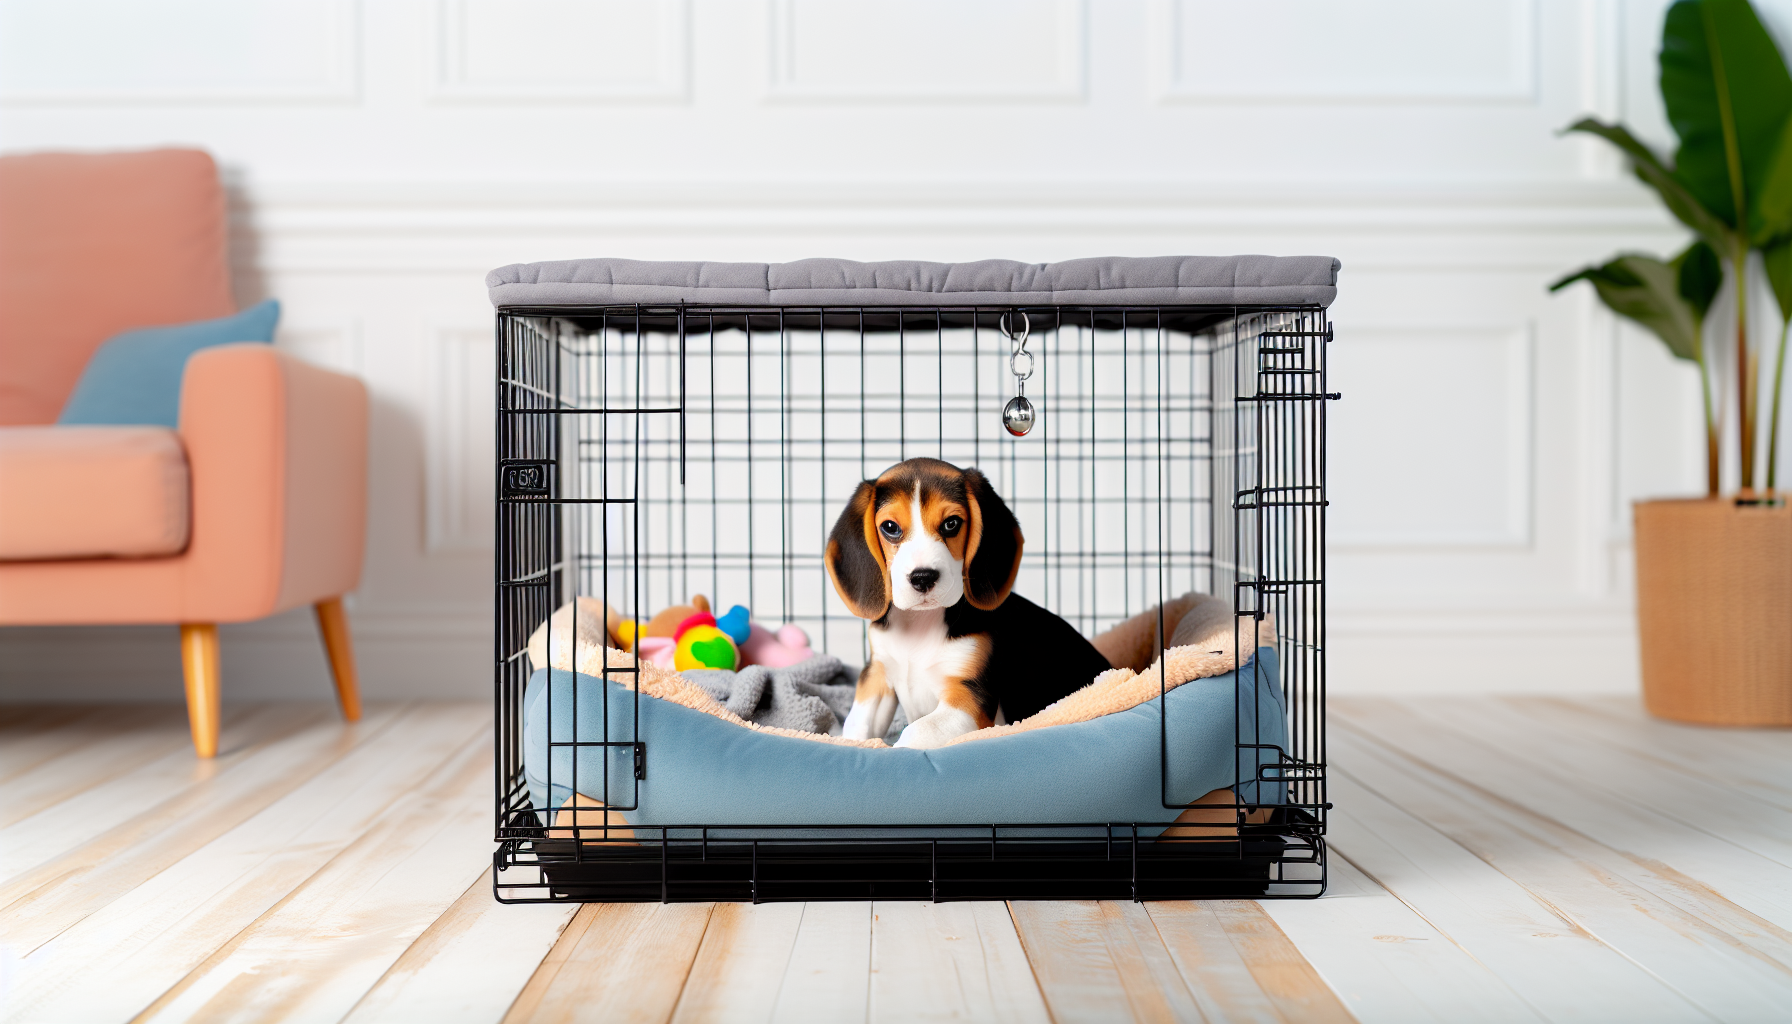 Beagle puppy in a crate with a comfortable bed and toys